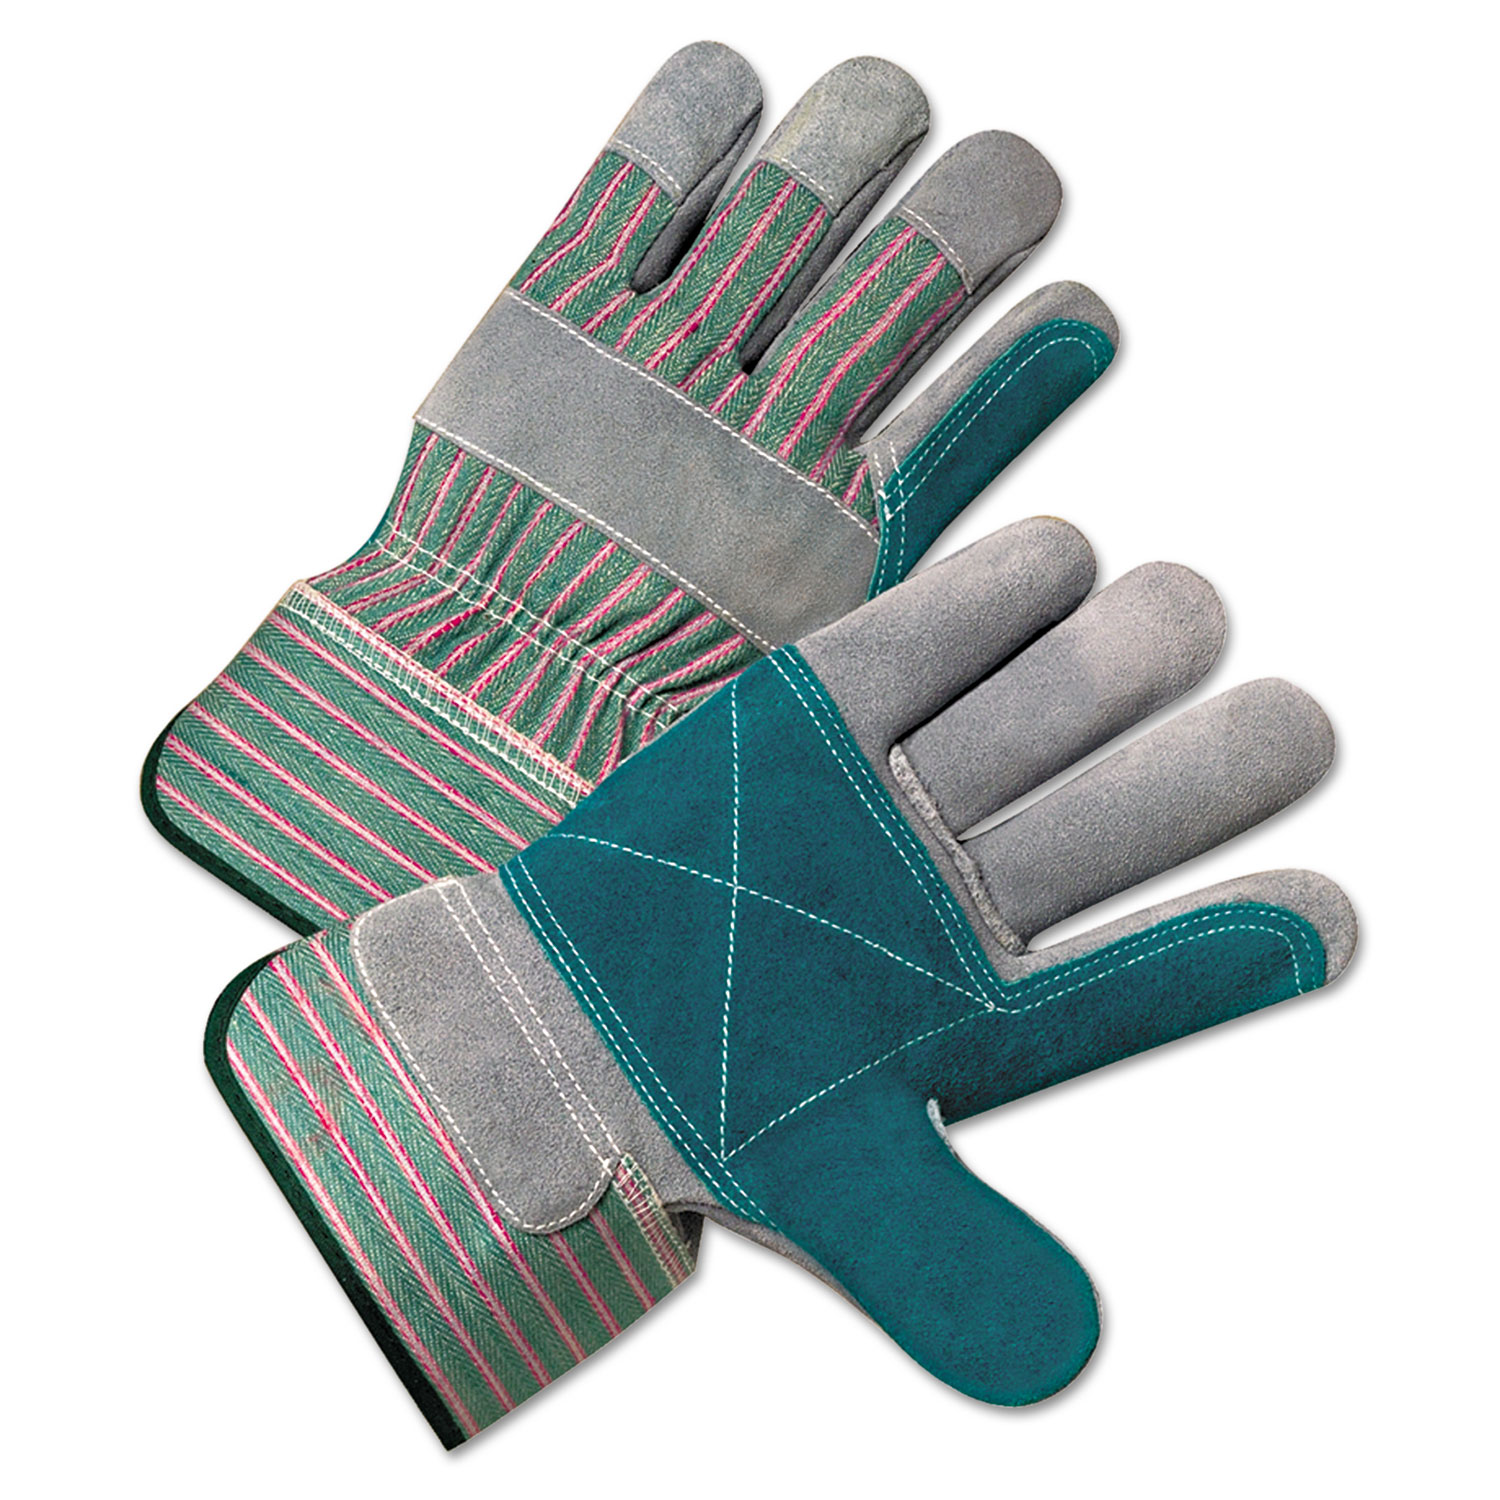  Anchor Brand 500DP 2000 Series Leather Palm Gloves, Gray/Green/Red, Large, 12 Pairs (ANR2300) 